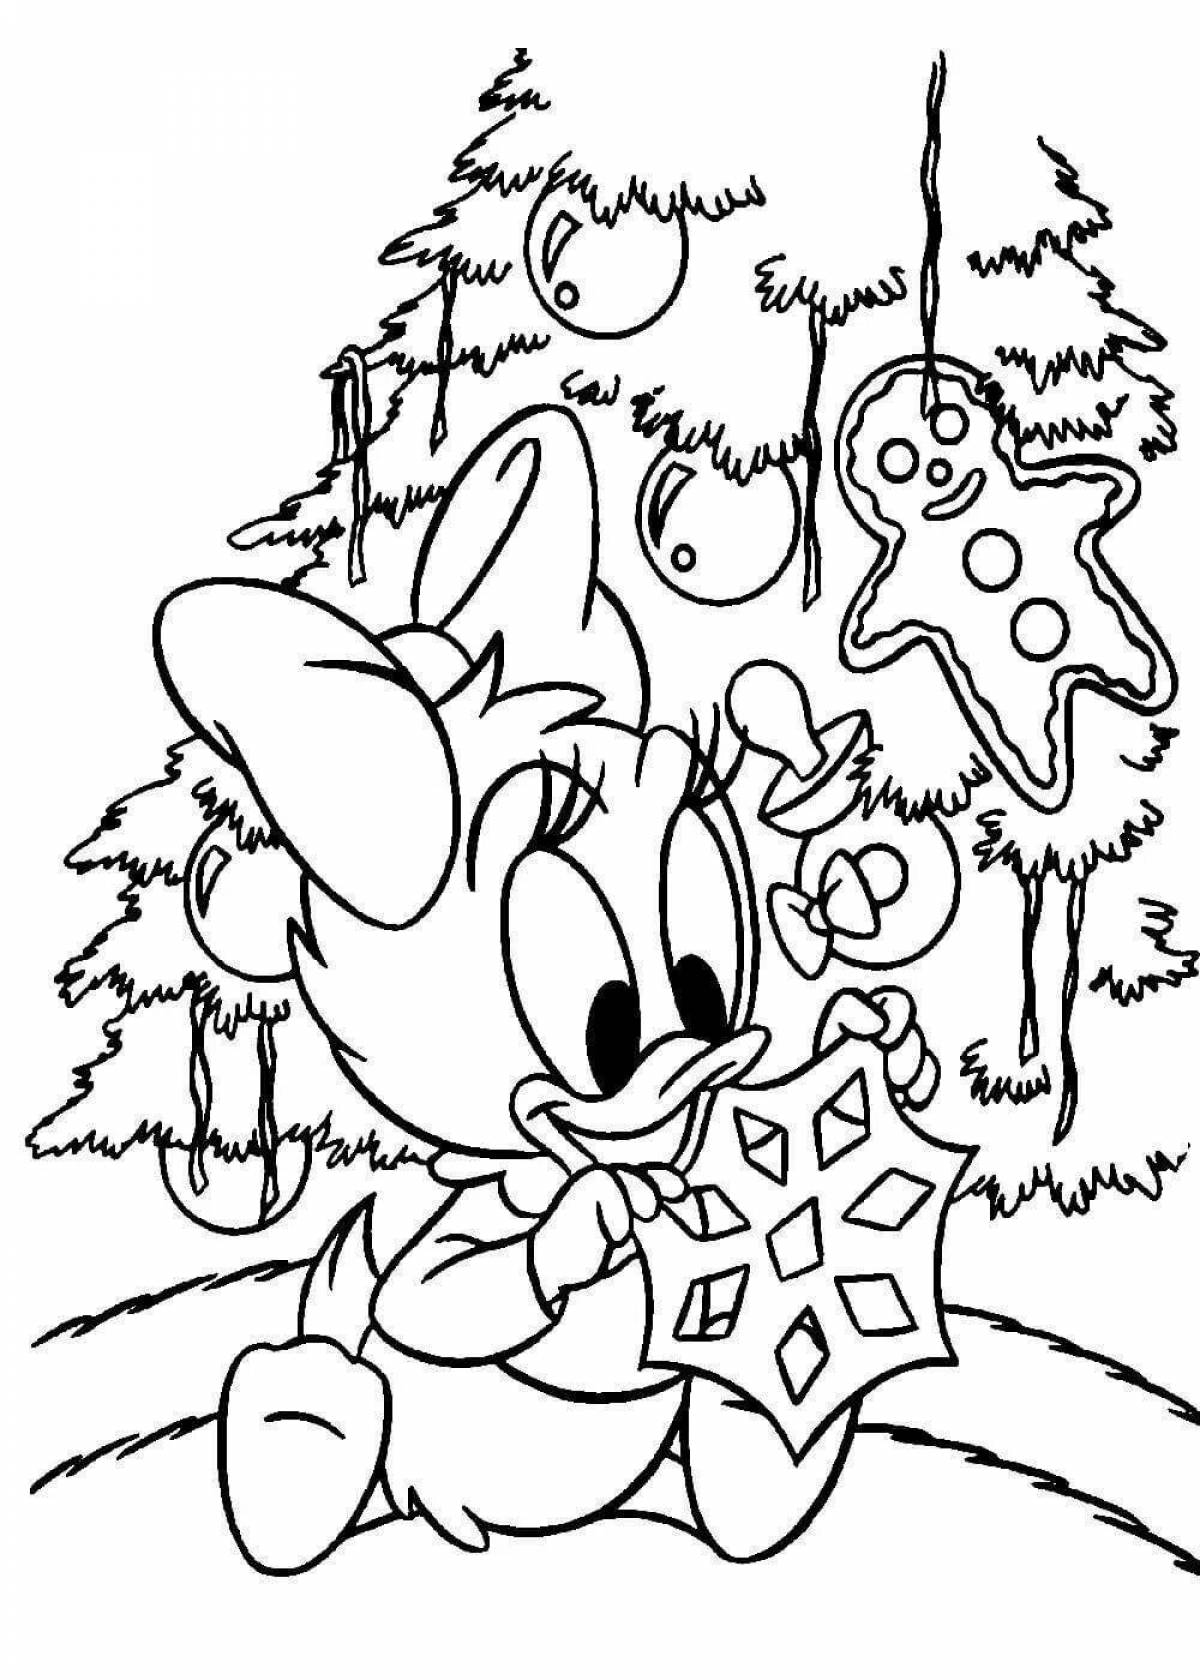 Glitter Christmas coloring book